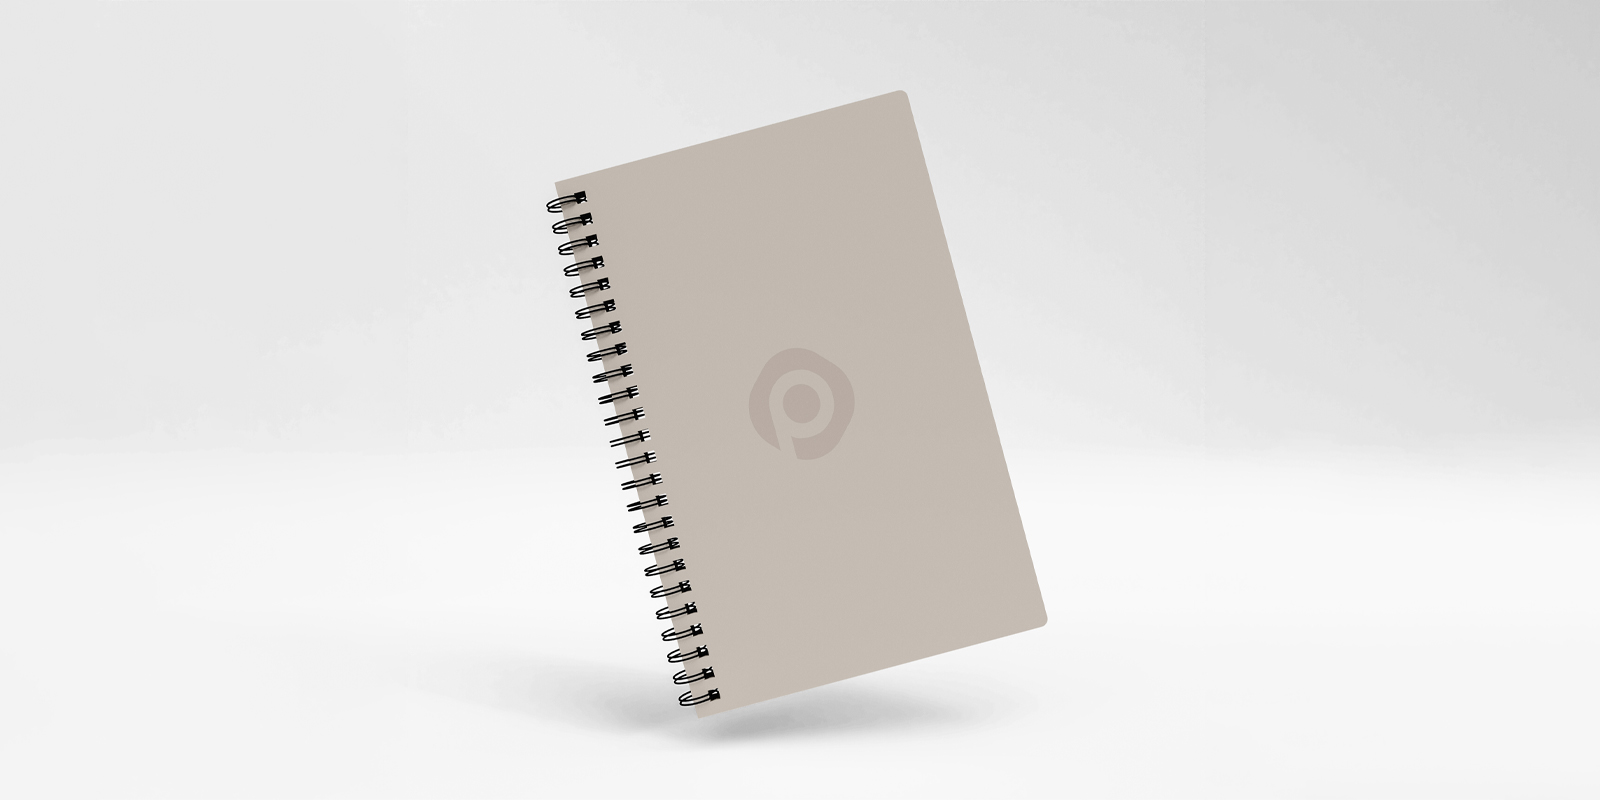 Spiral notebooks in Brisbane - Print with Pagerr